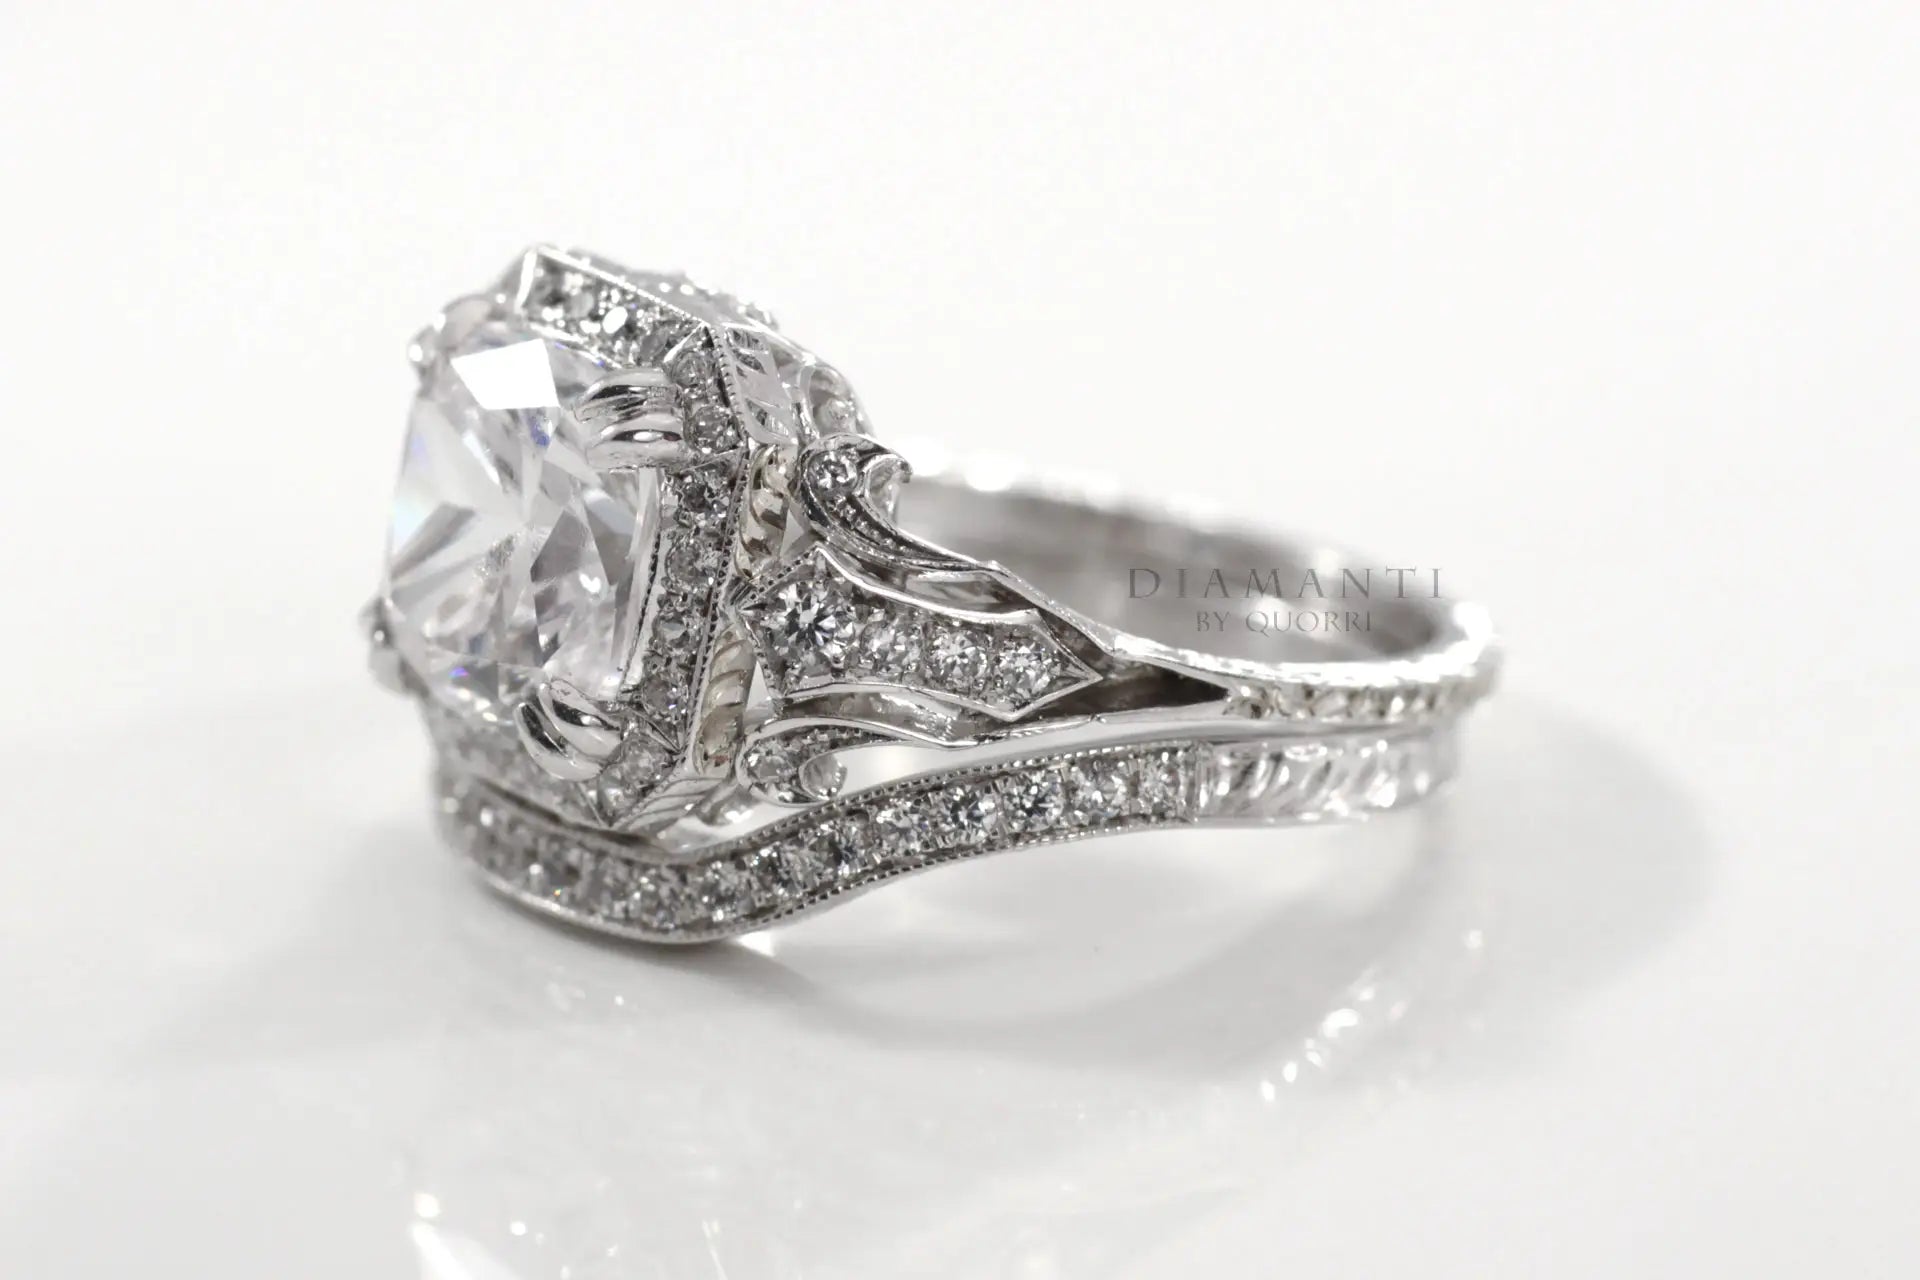 18k white gold antique affordable round lab diamond engagement and wedding band at Quorri